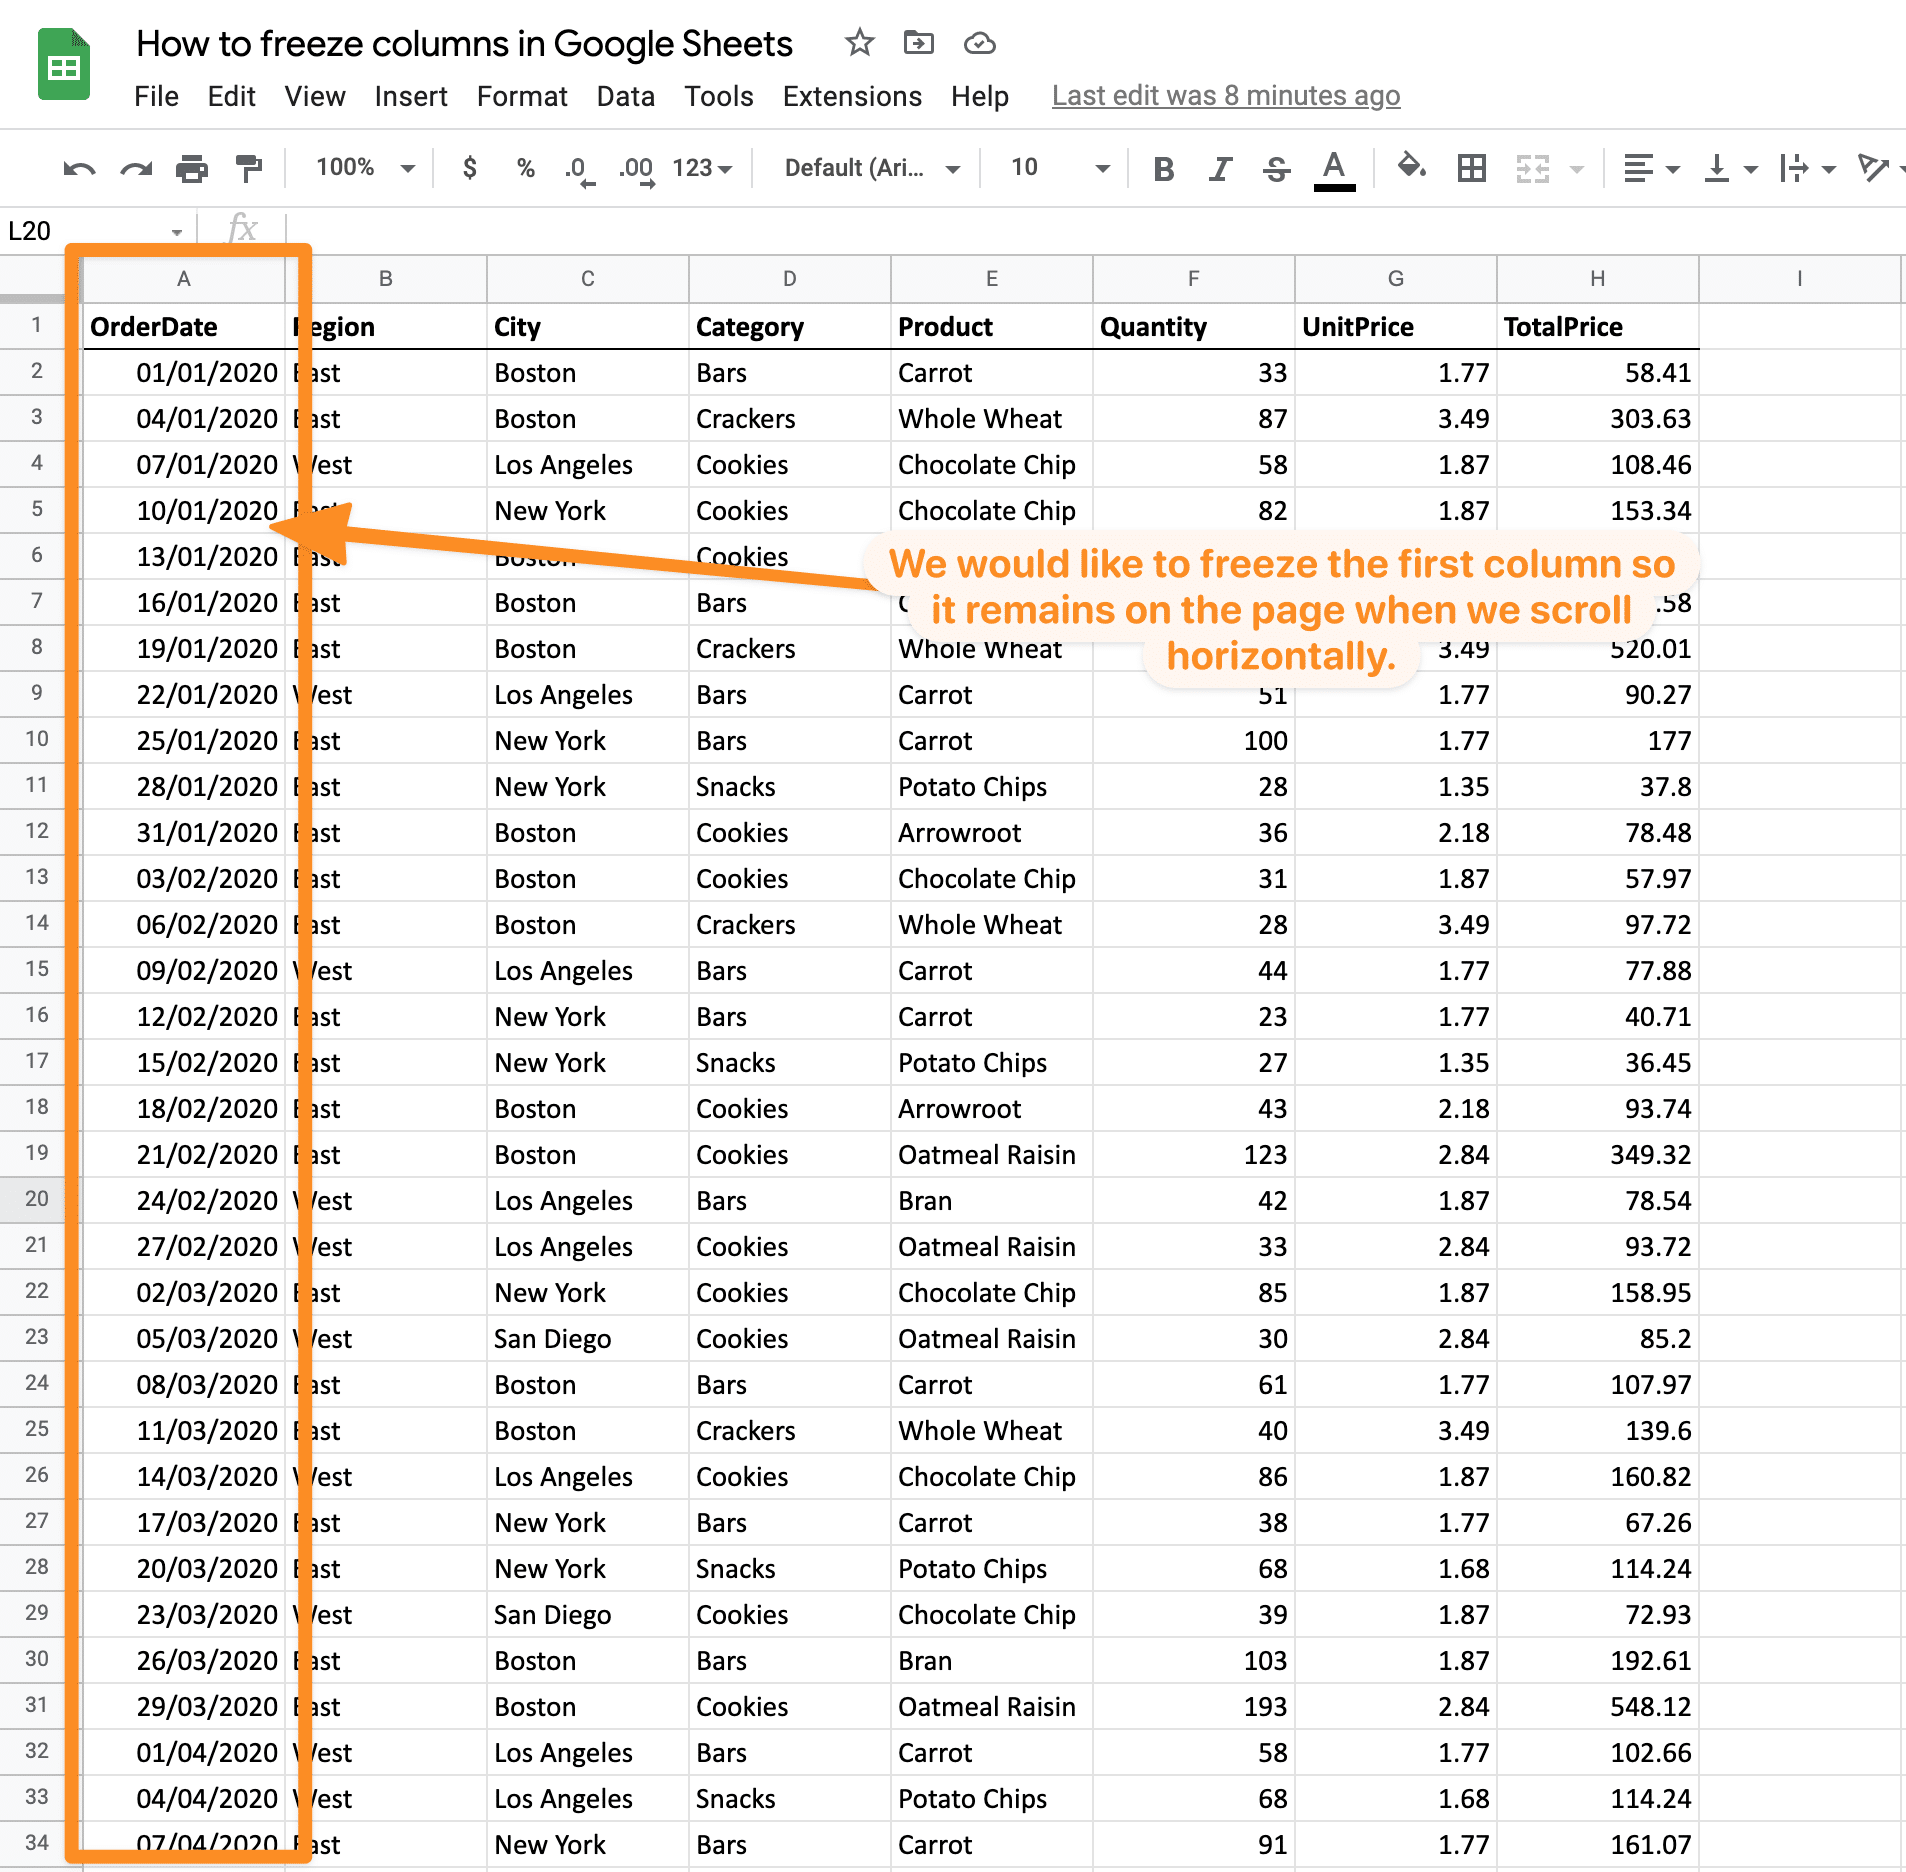 How to freeze columns in Google Sheets